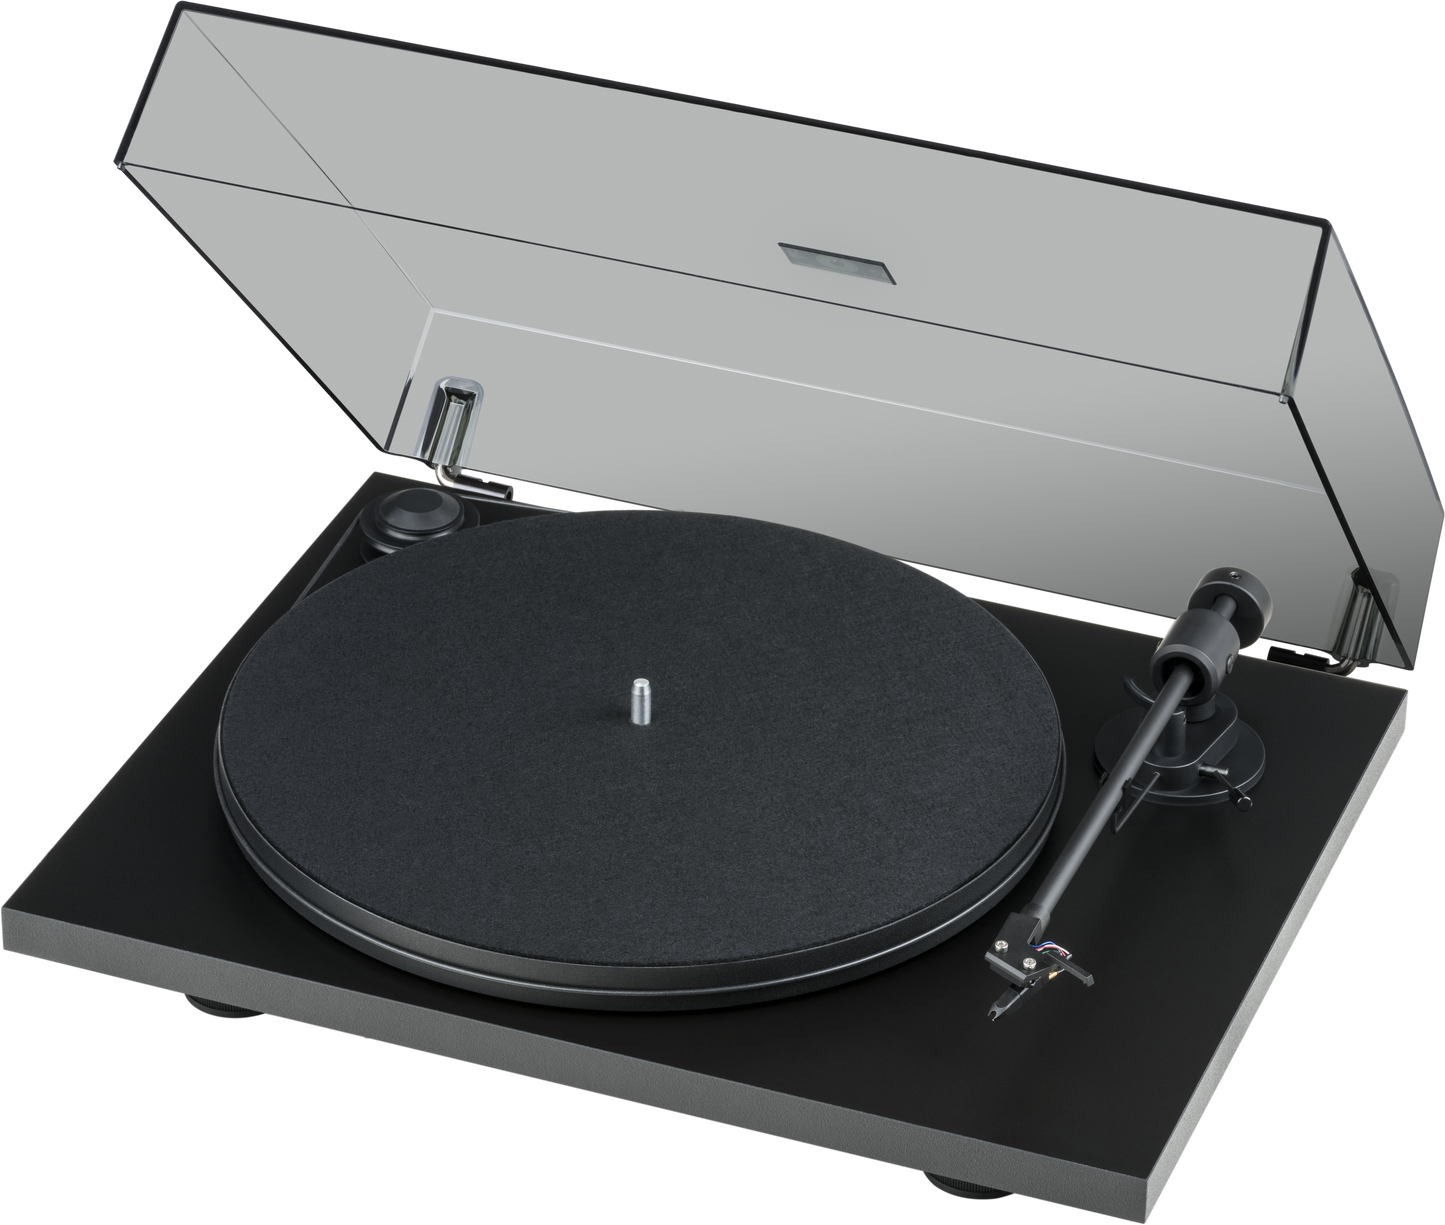 Pro-ject Primary E Turntable